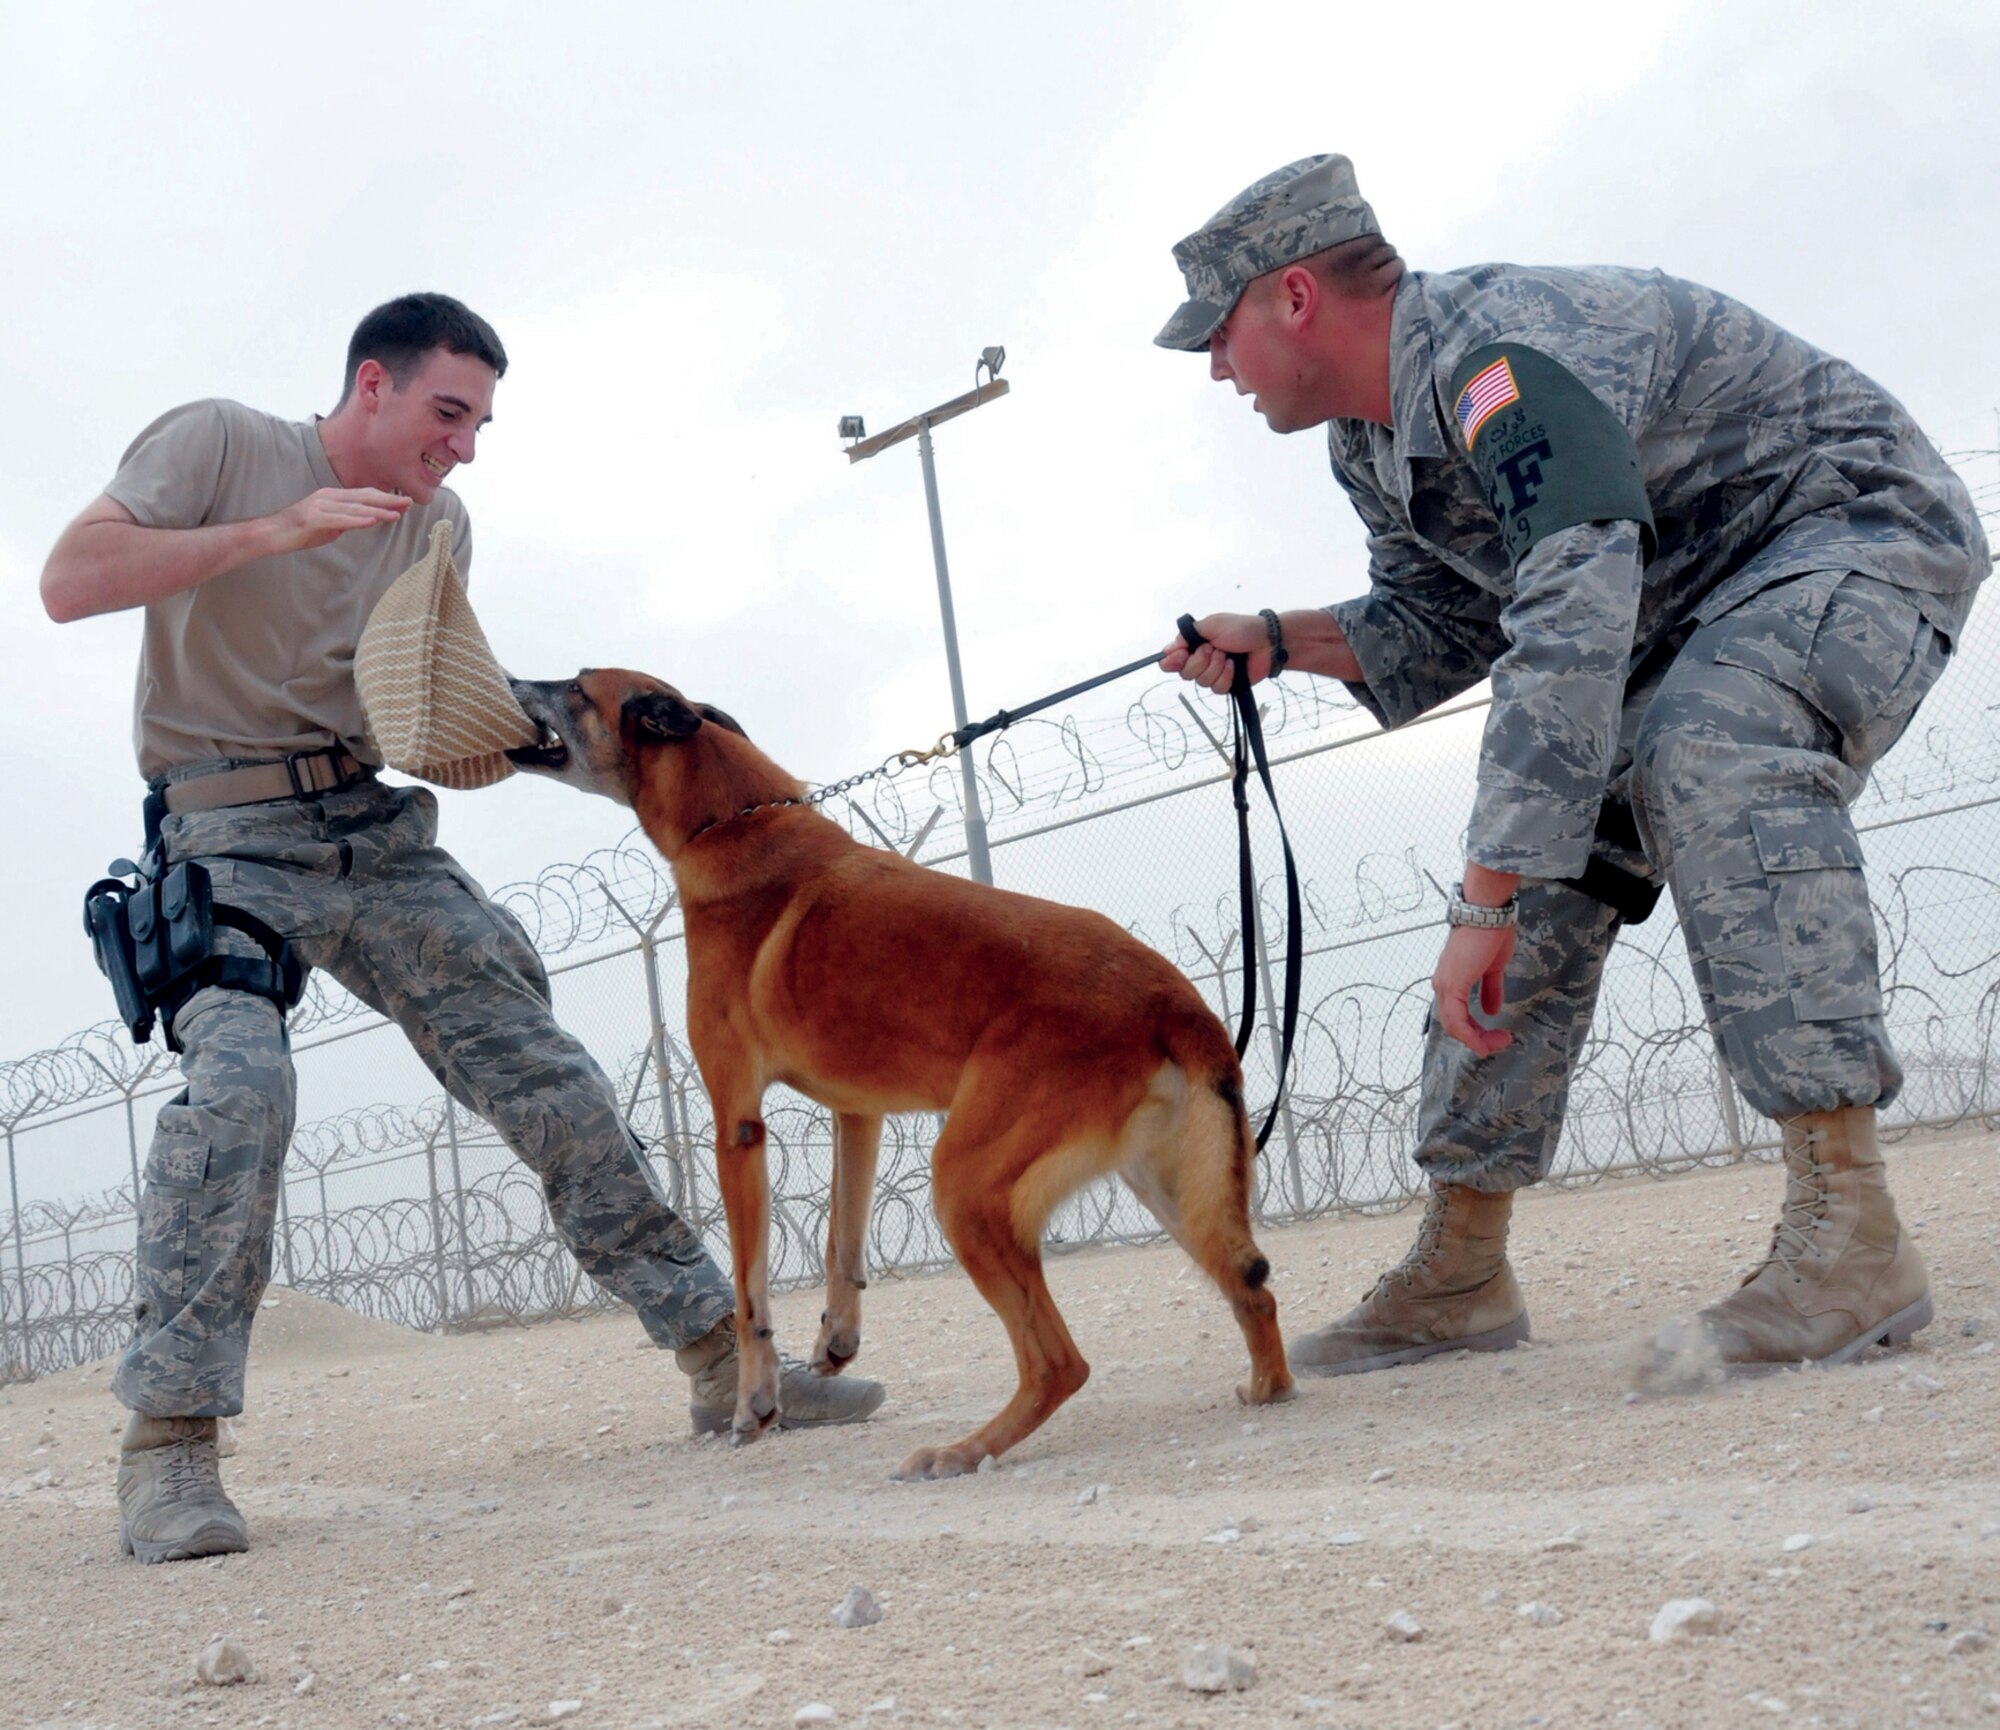 Staff Sgt. Logan Ray, military working dog handler assigned to the 379th Expeditionary Security Forces Squadron, gets apprehended by Lenox, a Belgian Malinous, while Staff Sgt. Edward Lawlor, 379 ESFS military working dog handler, prepares to release Lenox from his hold on the suspect at an undisclosed location in Southwest Asia Nov. 4, 2008. These 379 ESFS dog handlers provide the first line of defense for the base by detecting explosives and weapons. Sergeant Ray, a native of Bethesda, Md., and Sergeant Lawlor, a native of Wolcott, Conn., both are deployed from Andrews Air Force Base, Md. 